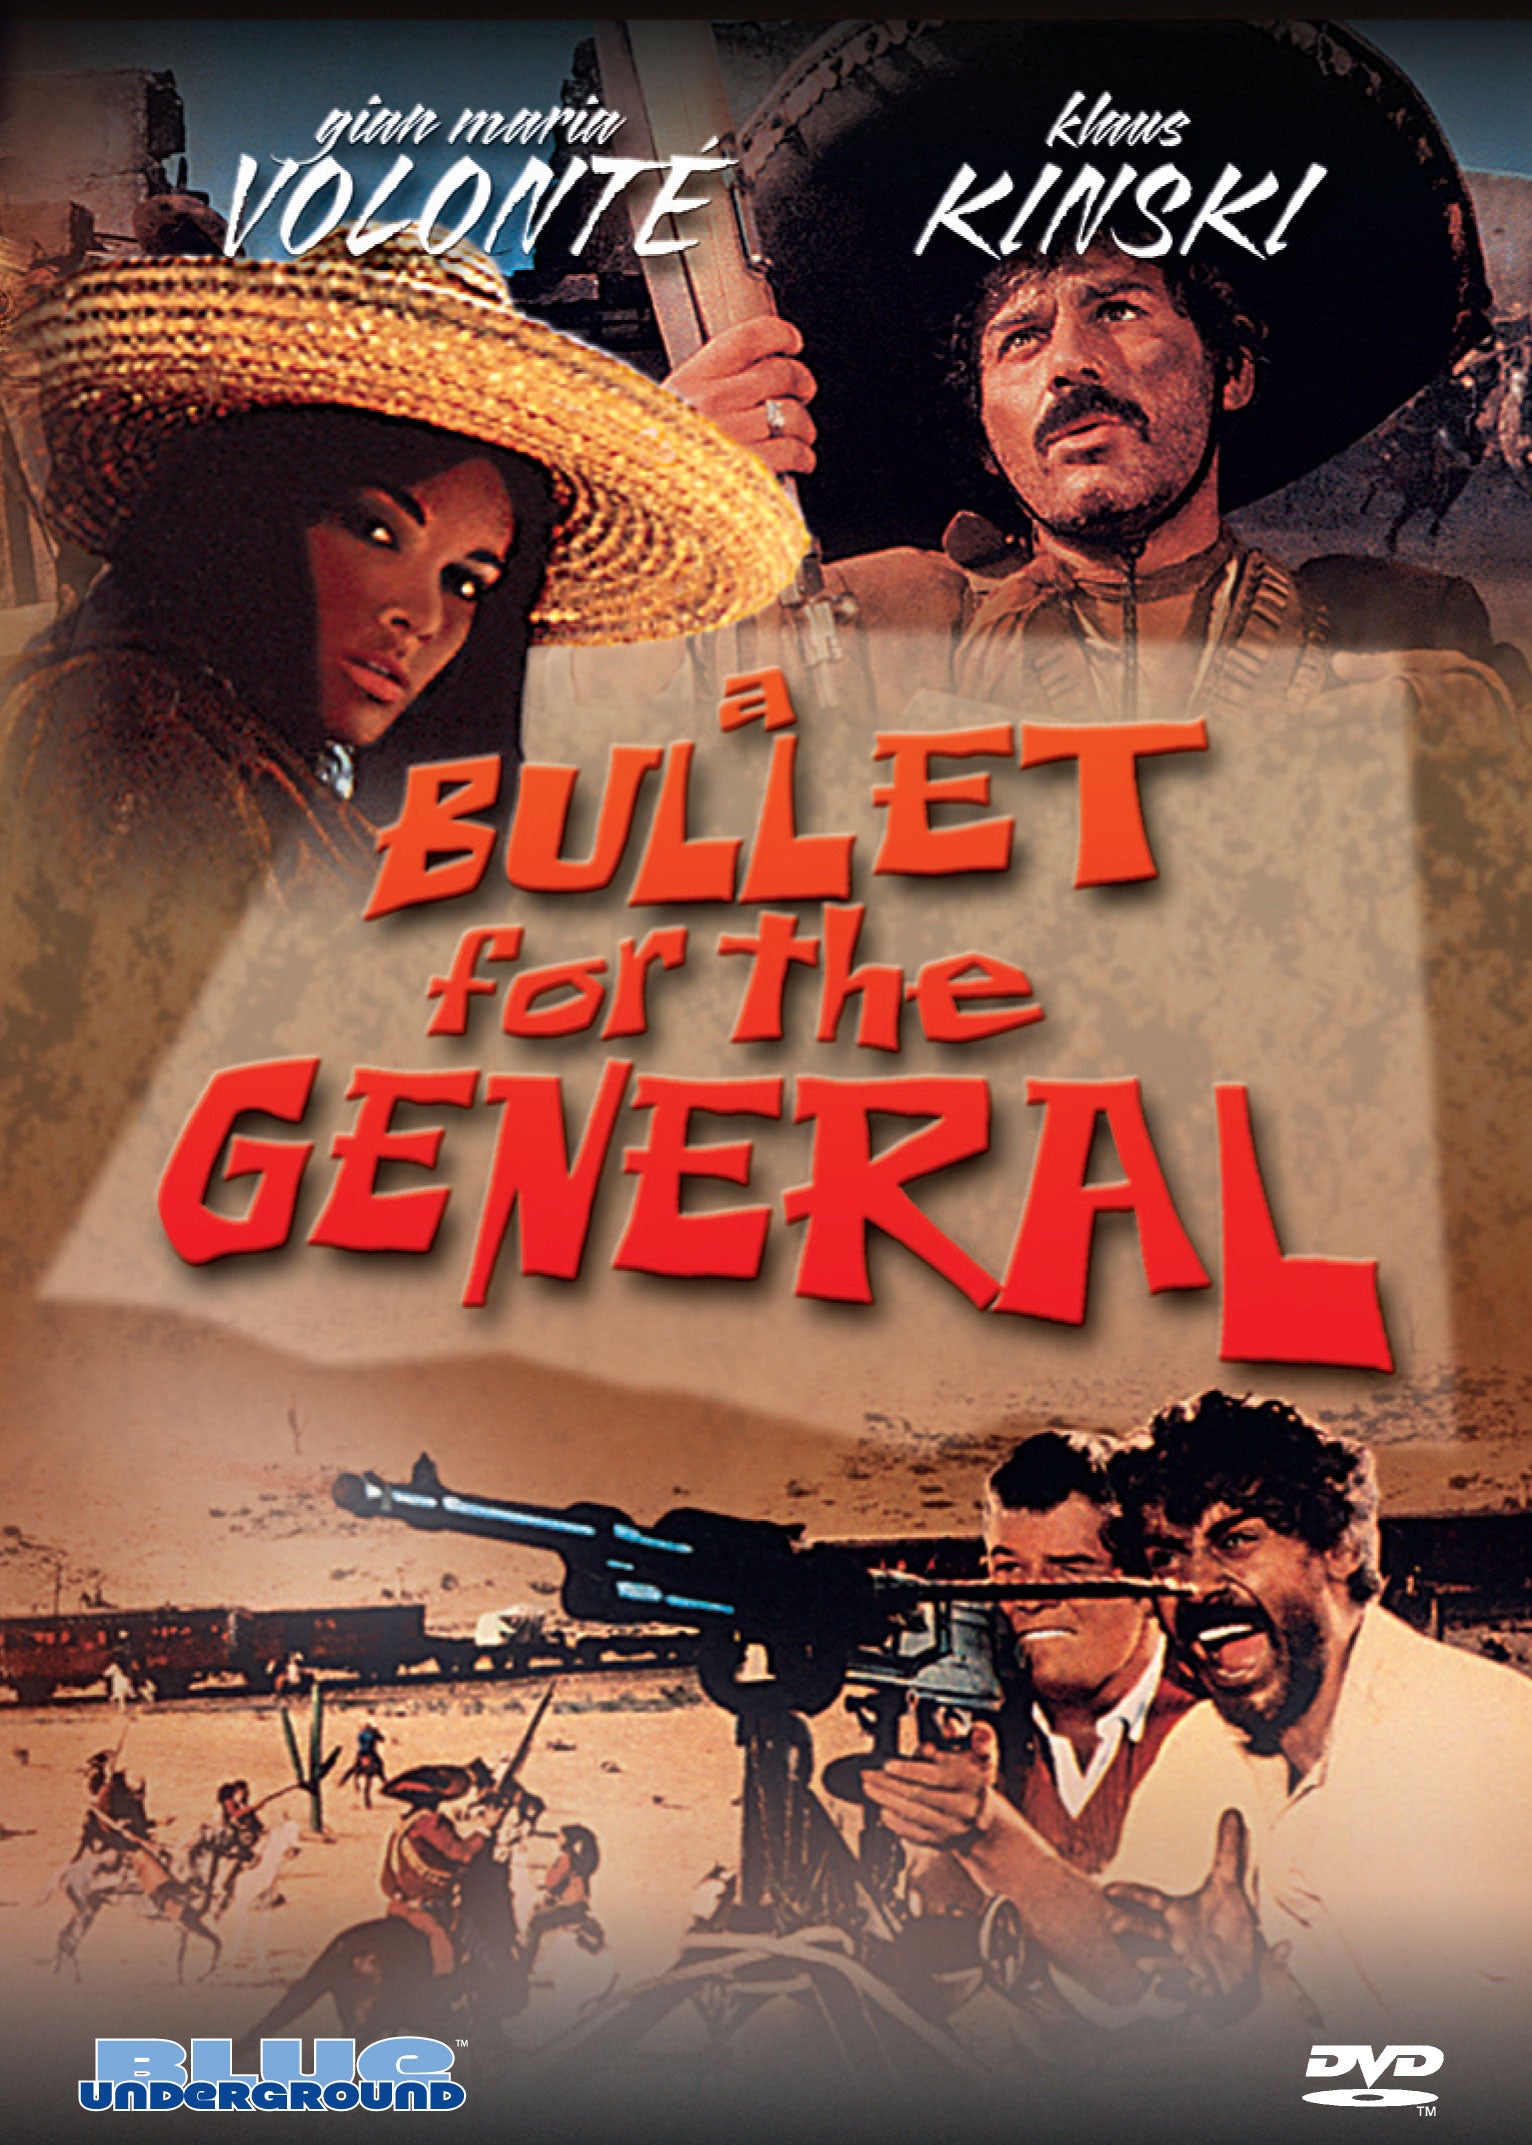 A BULLET FOR THE GENERAL DVD